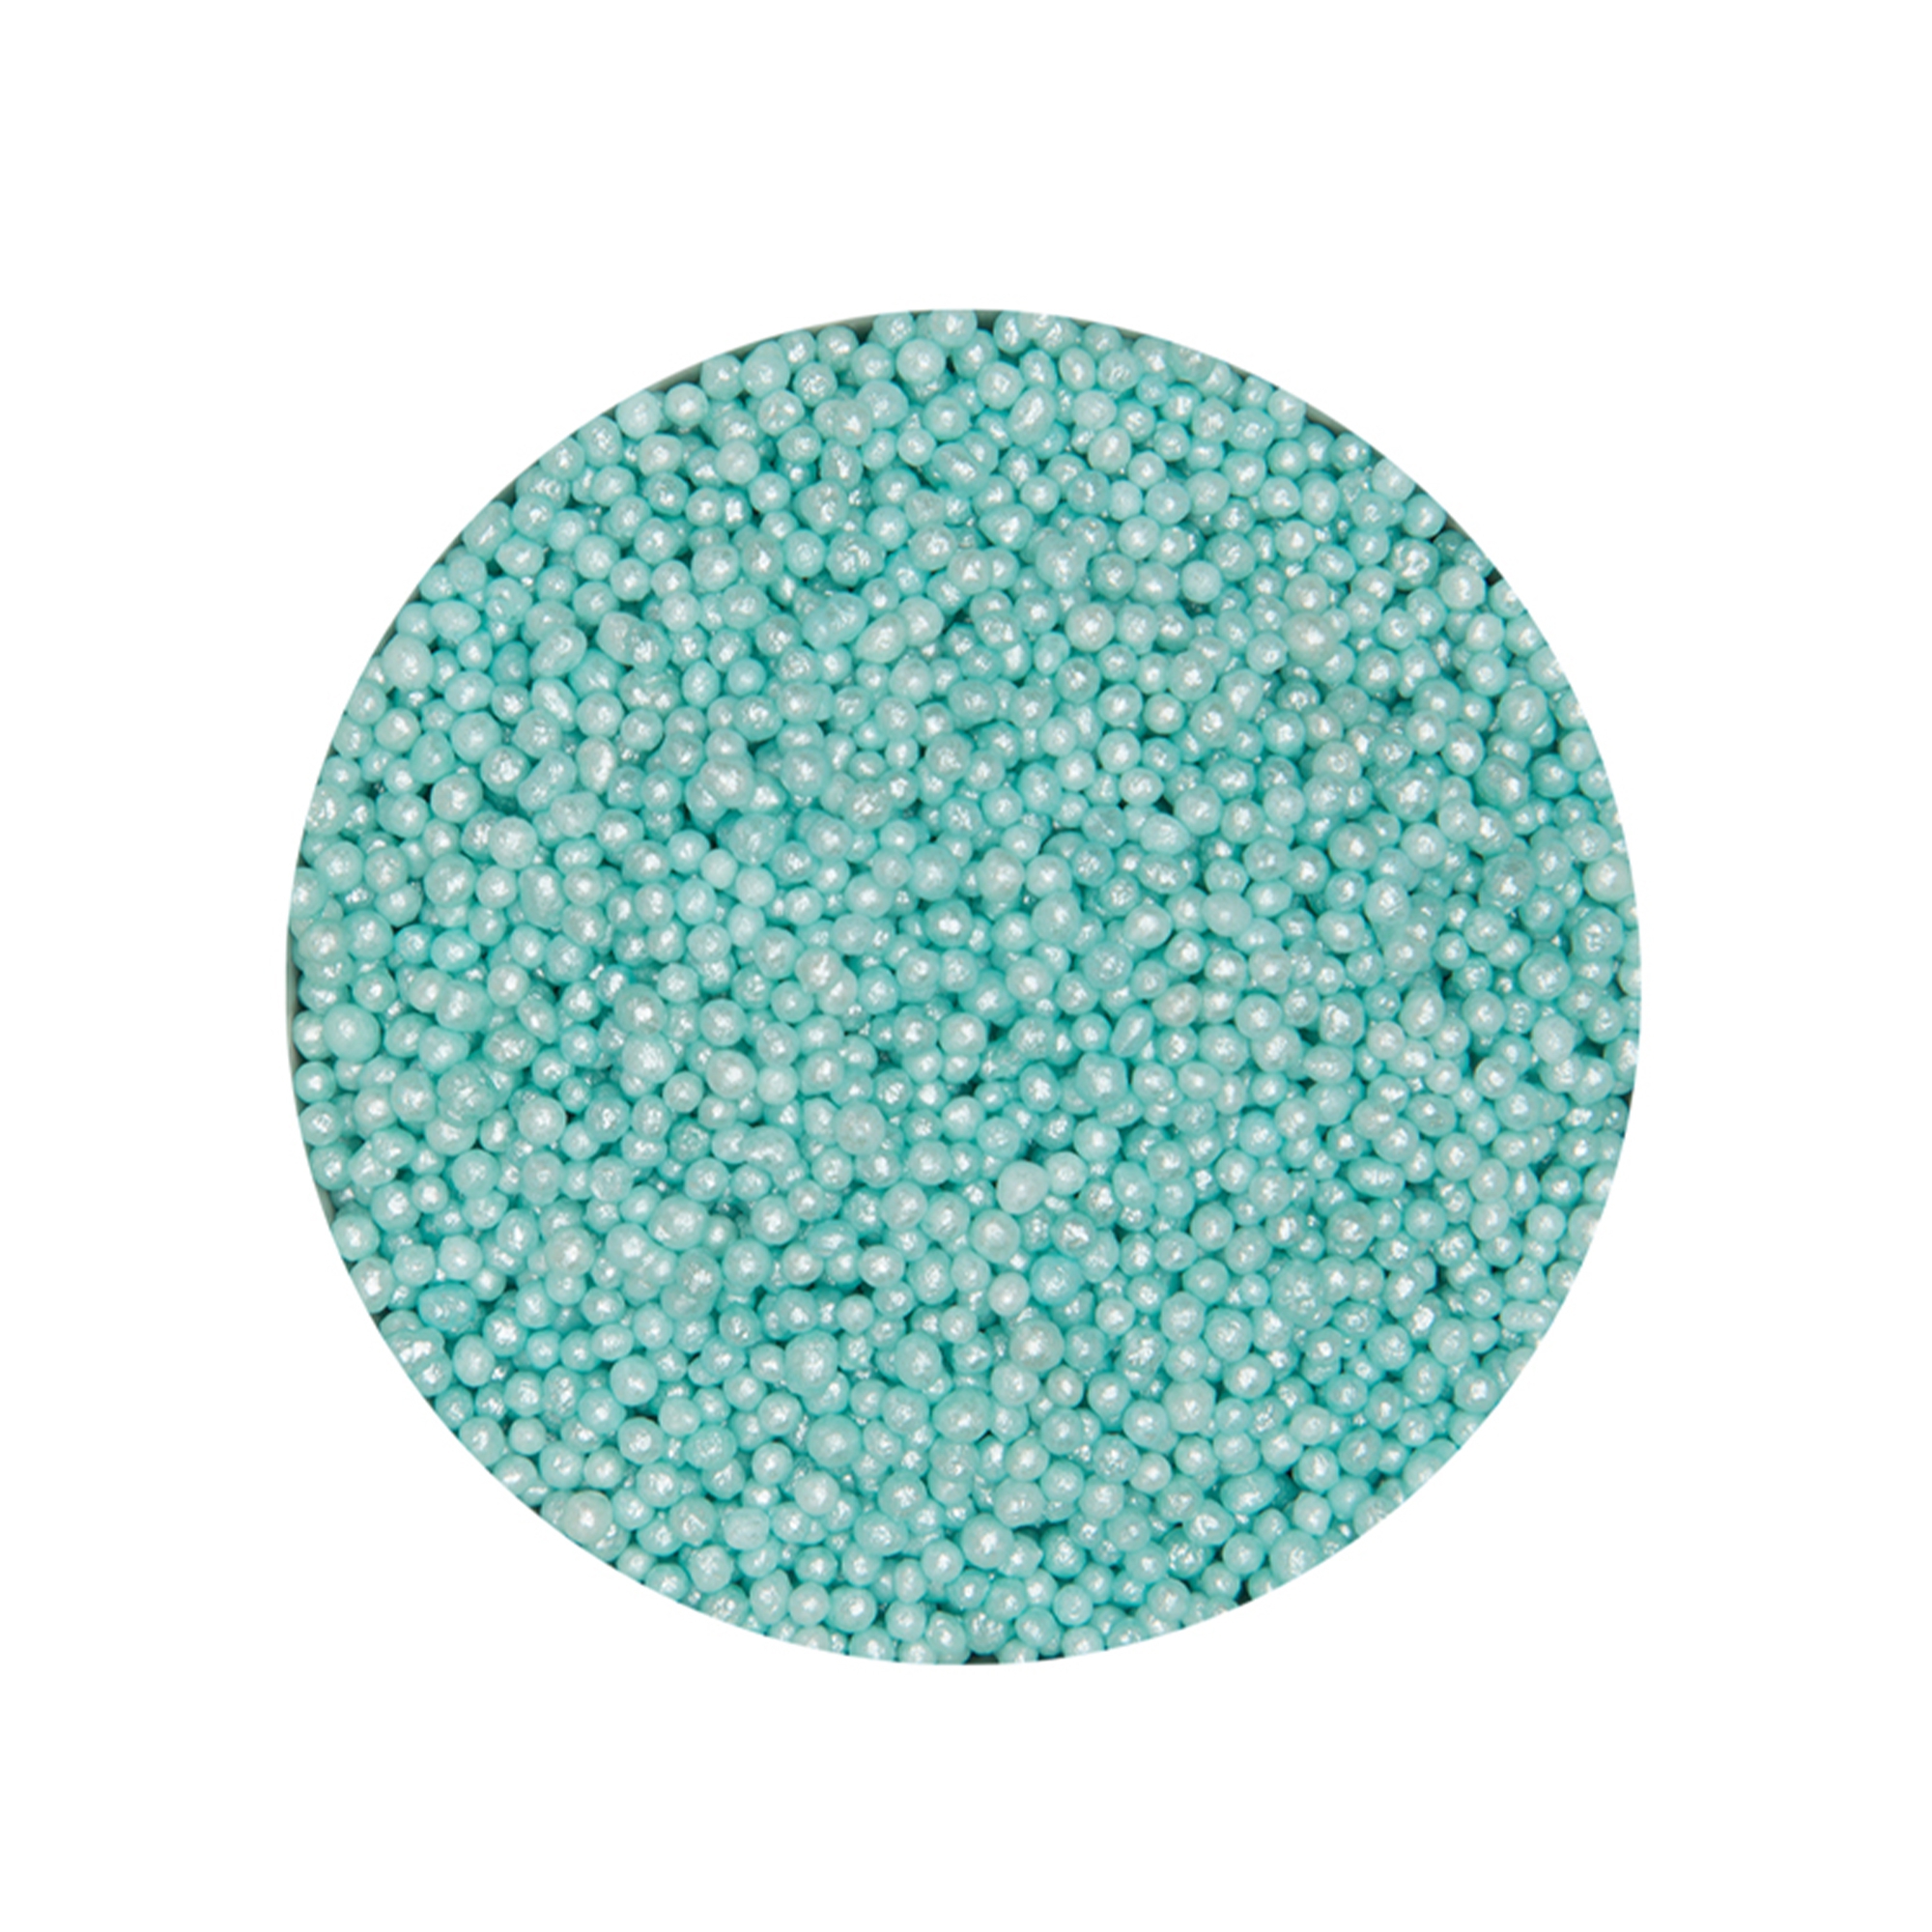 Städter - Edible sprinkle  Nonpareils - different colours